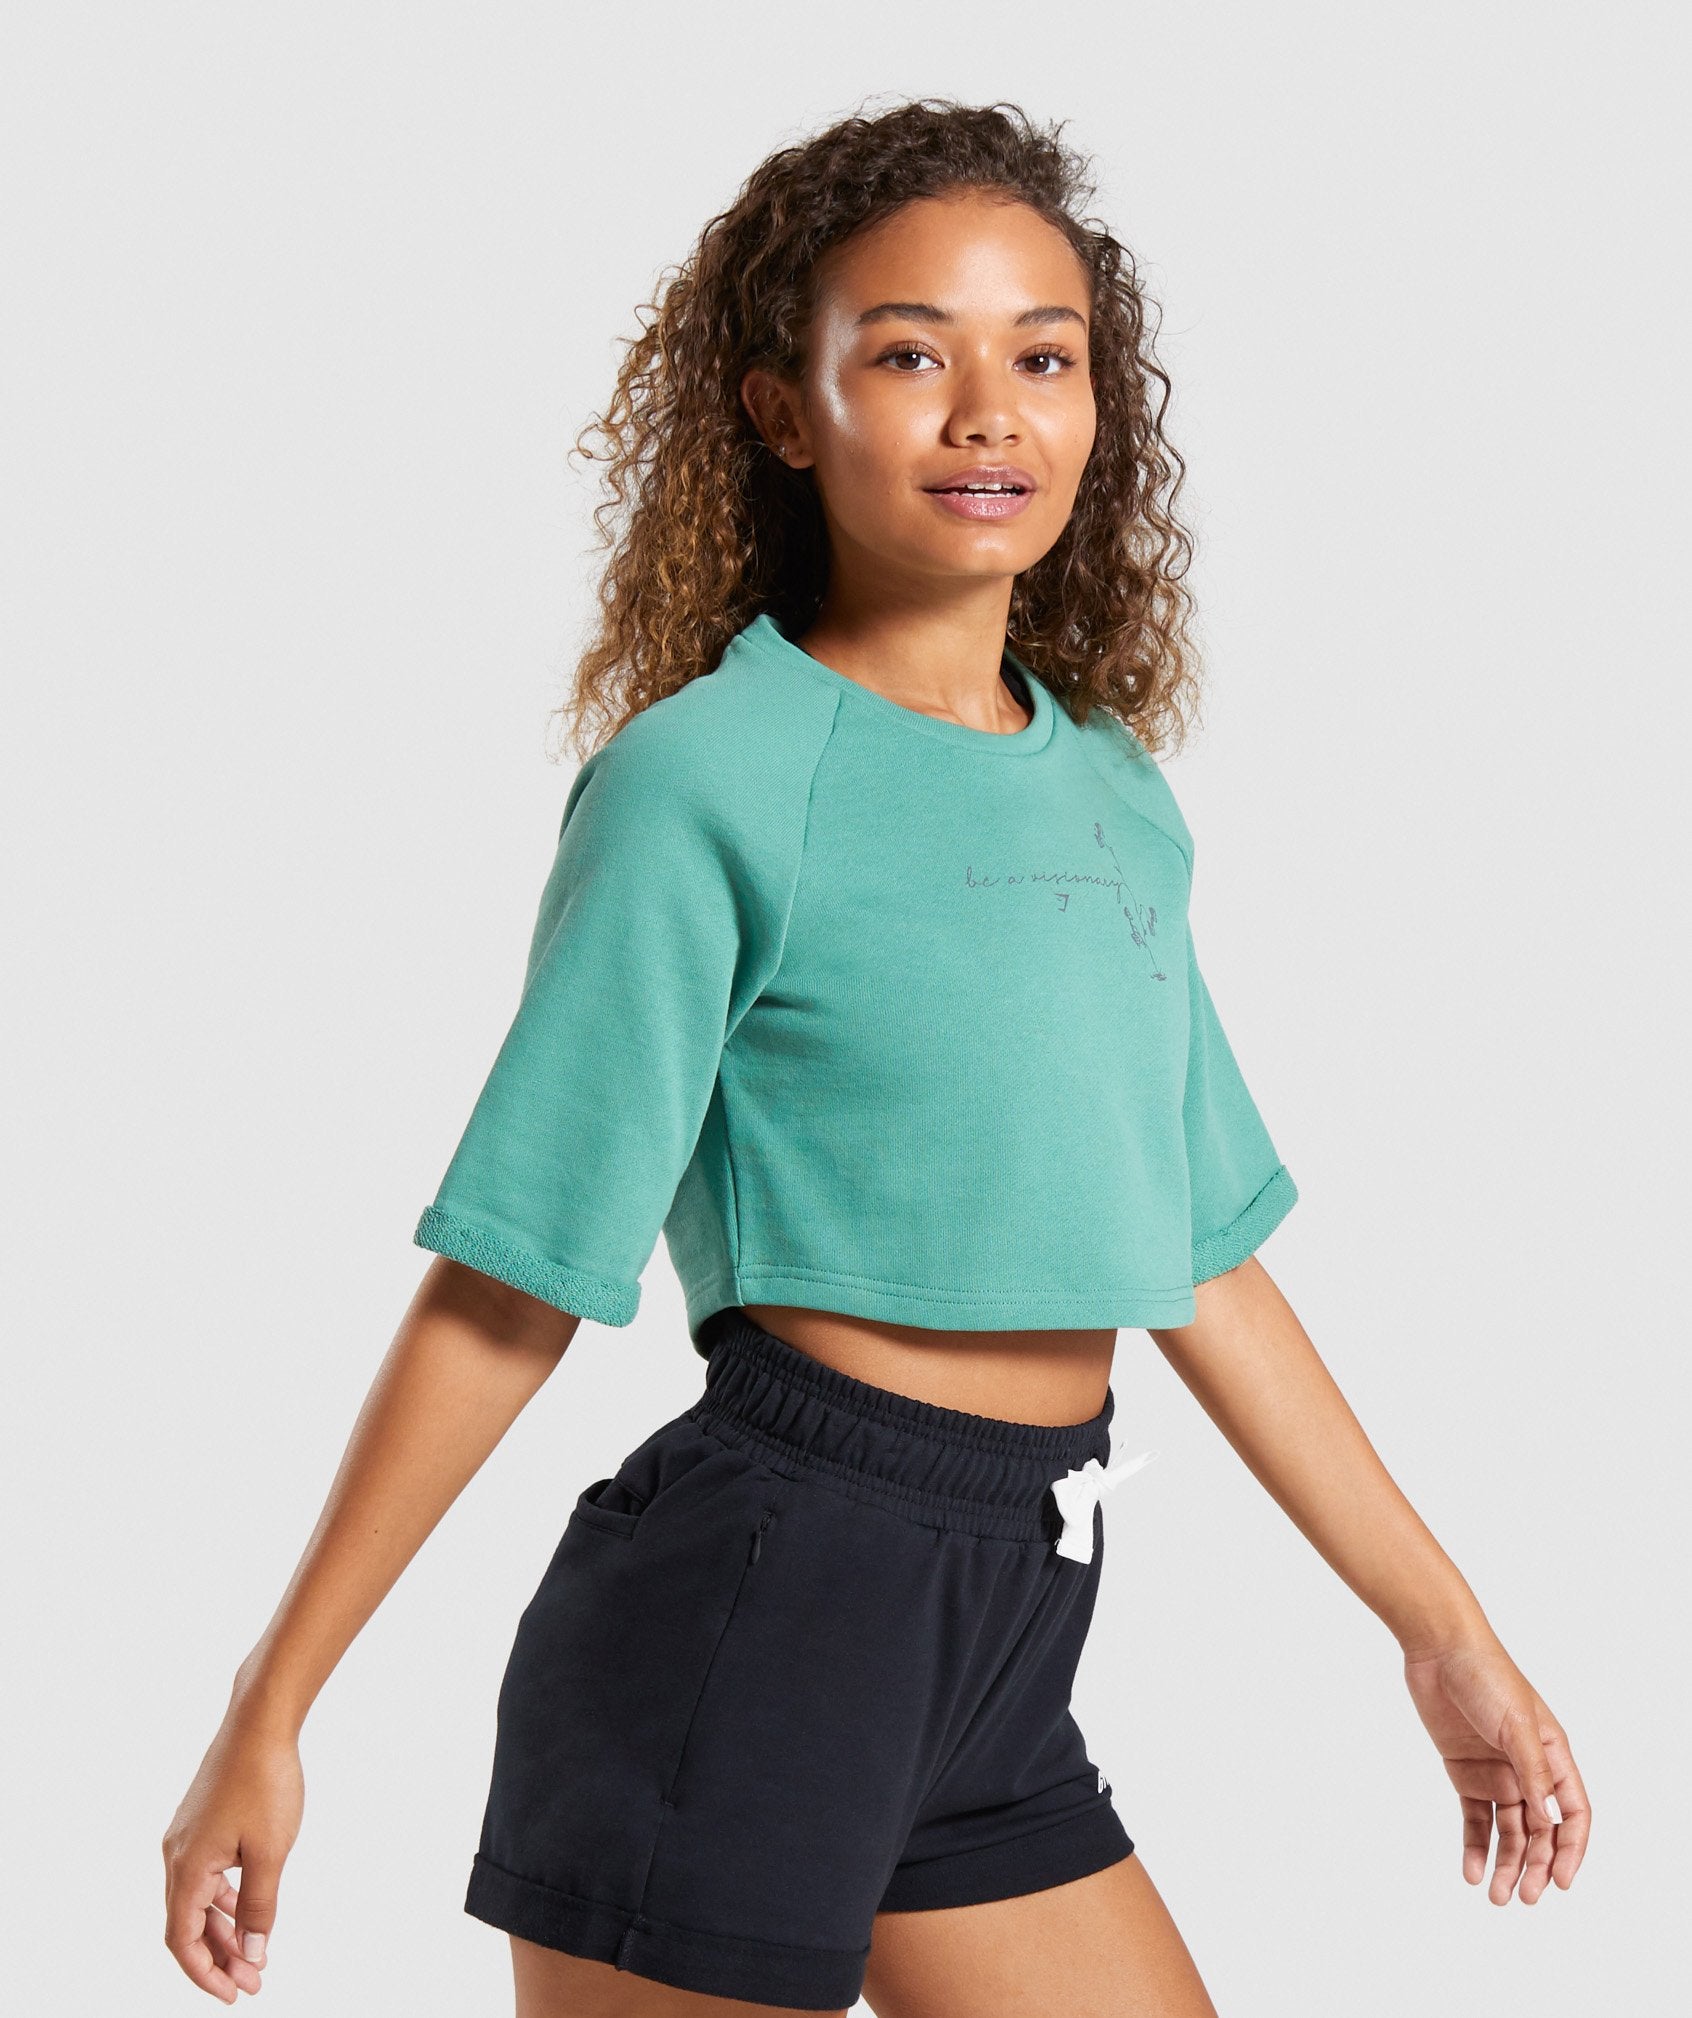 Roots Boxy Cropped Sweater in Green - view 3